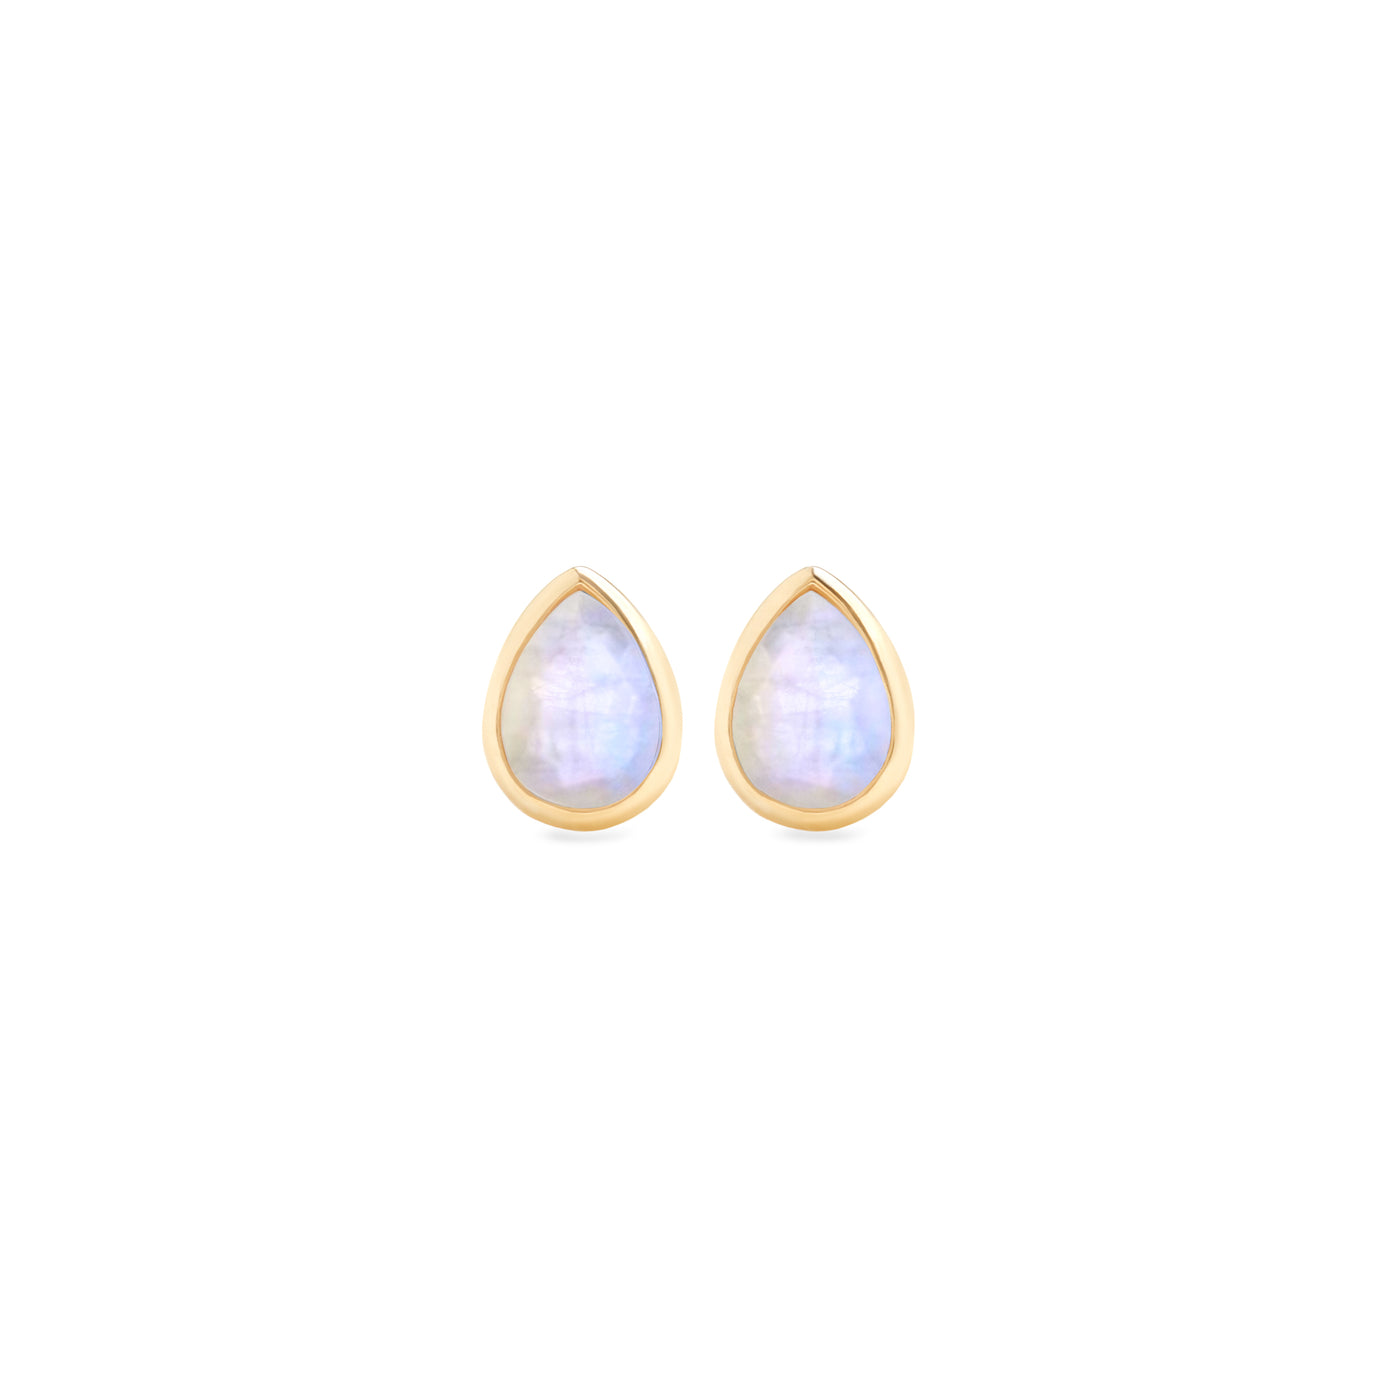 14 Karat Yellow Gold Stud Earrings with Pear Shaped Moonstone Against White Background